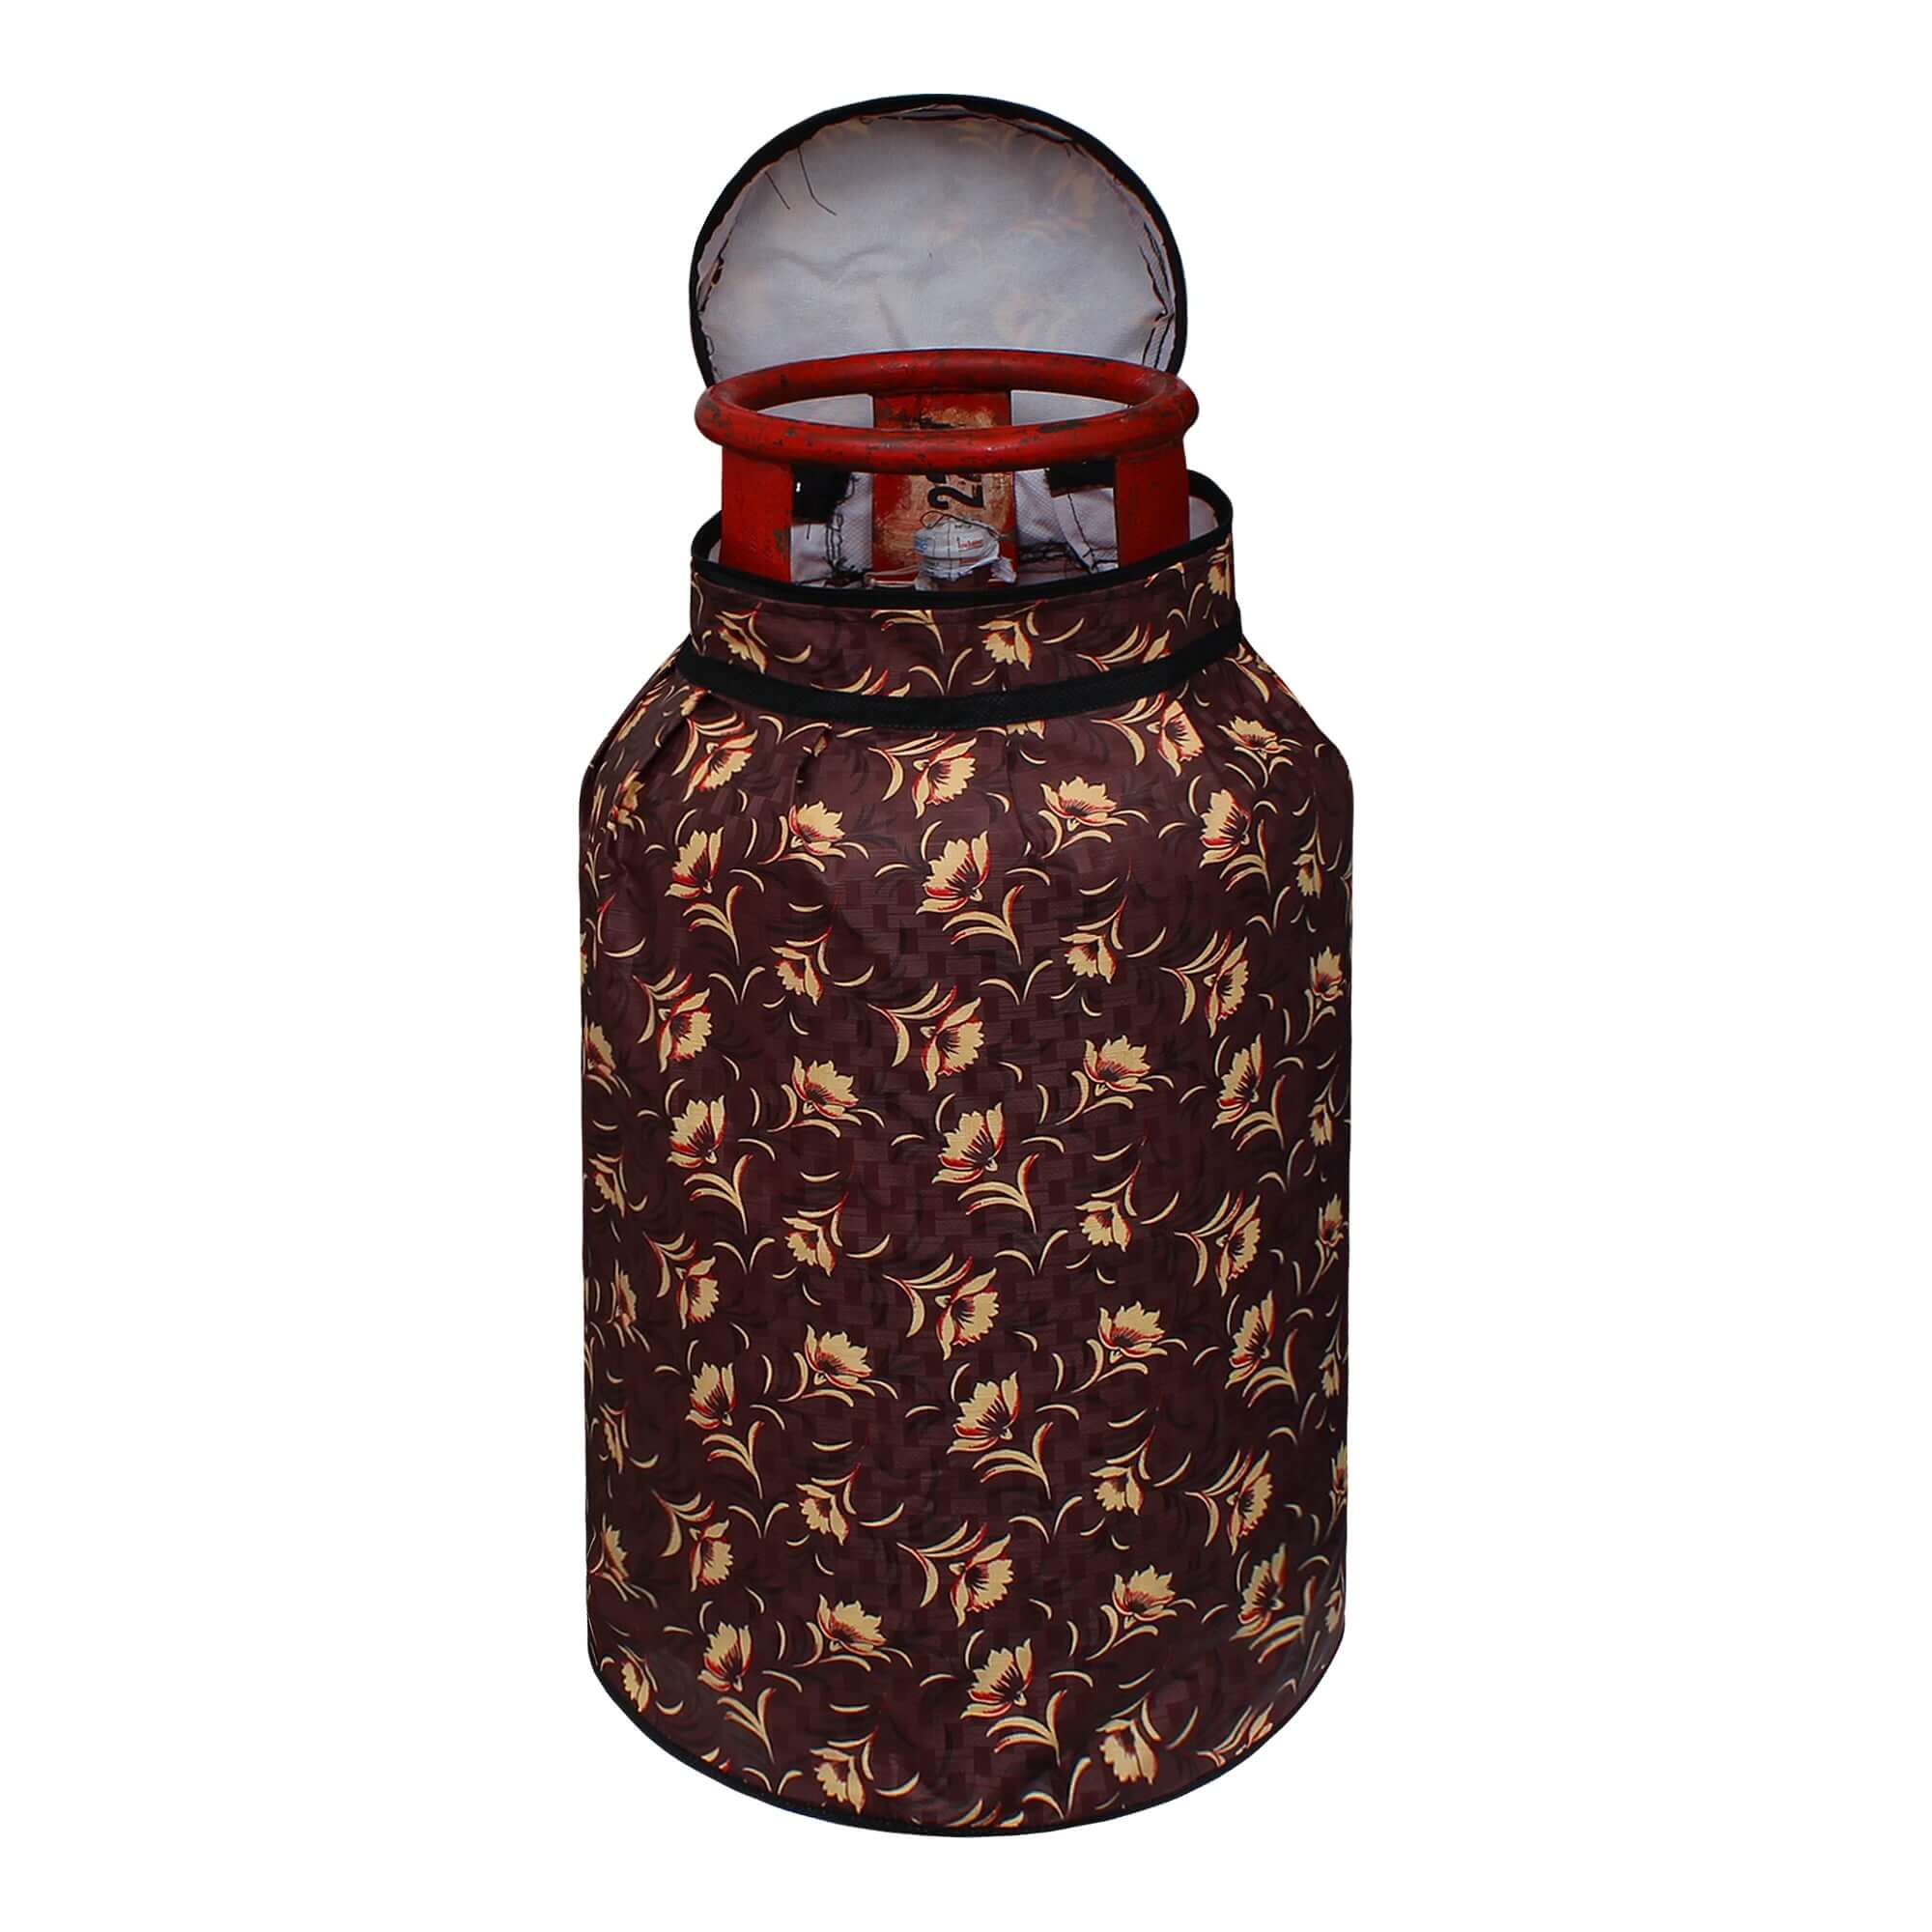 LPG Gas Cylinder Cover, SA36 - Dream Care Furnishings Private Limited